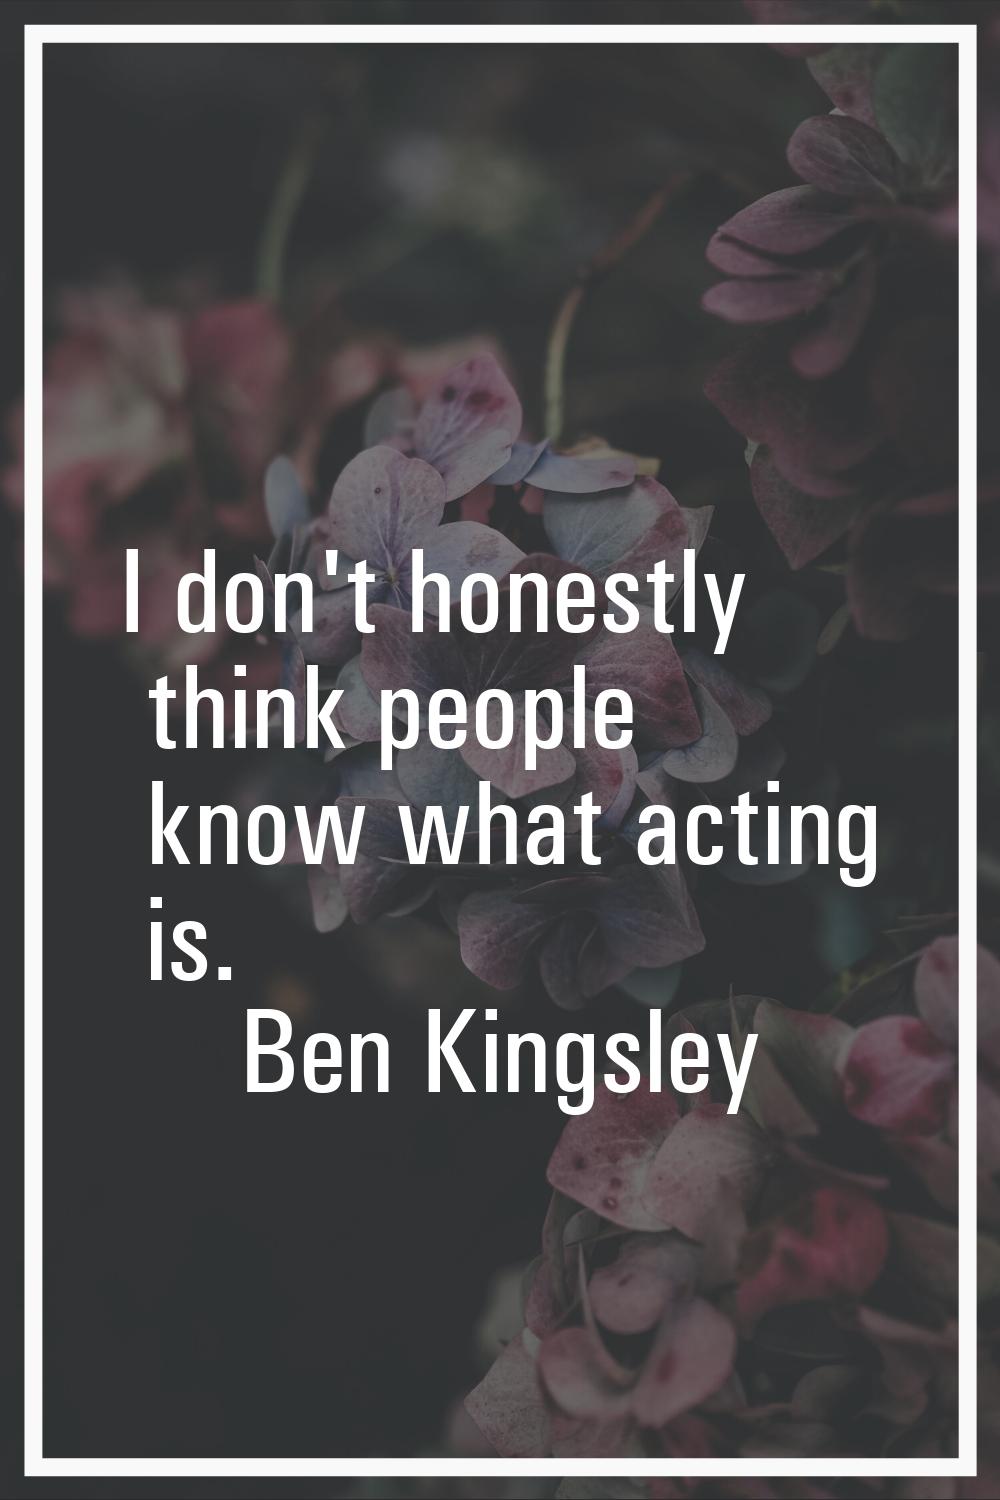 I don't honestly think people know what acting is.